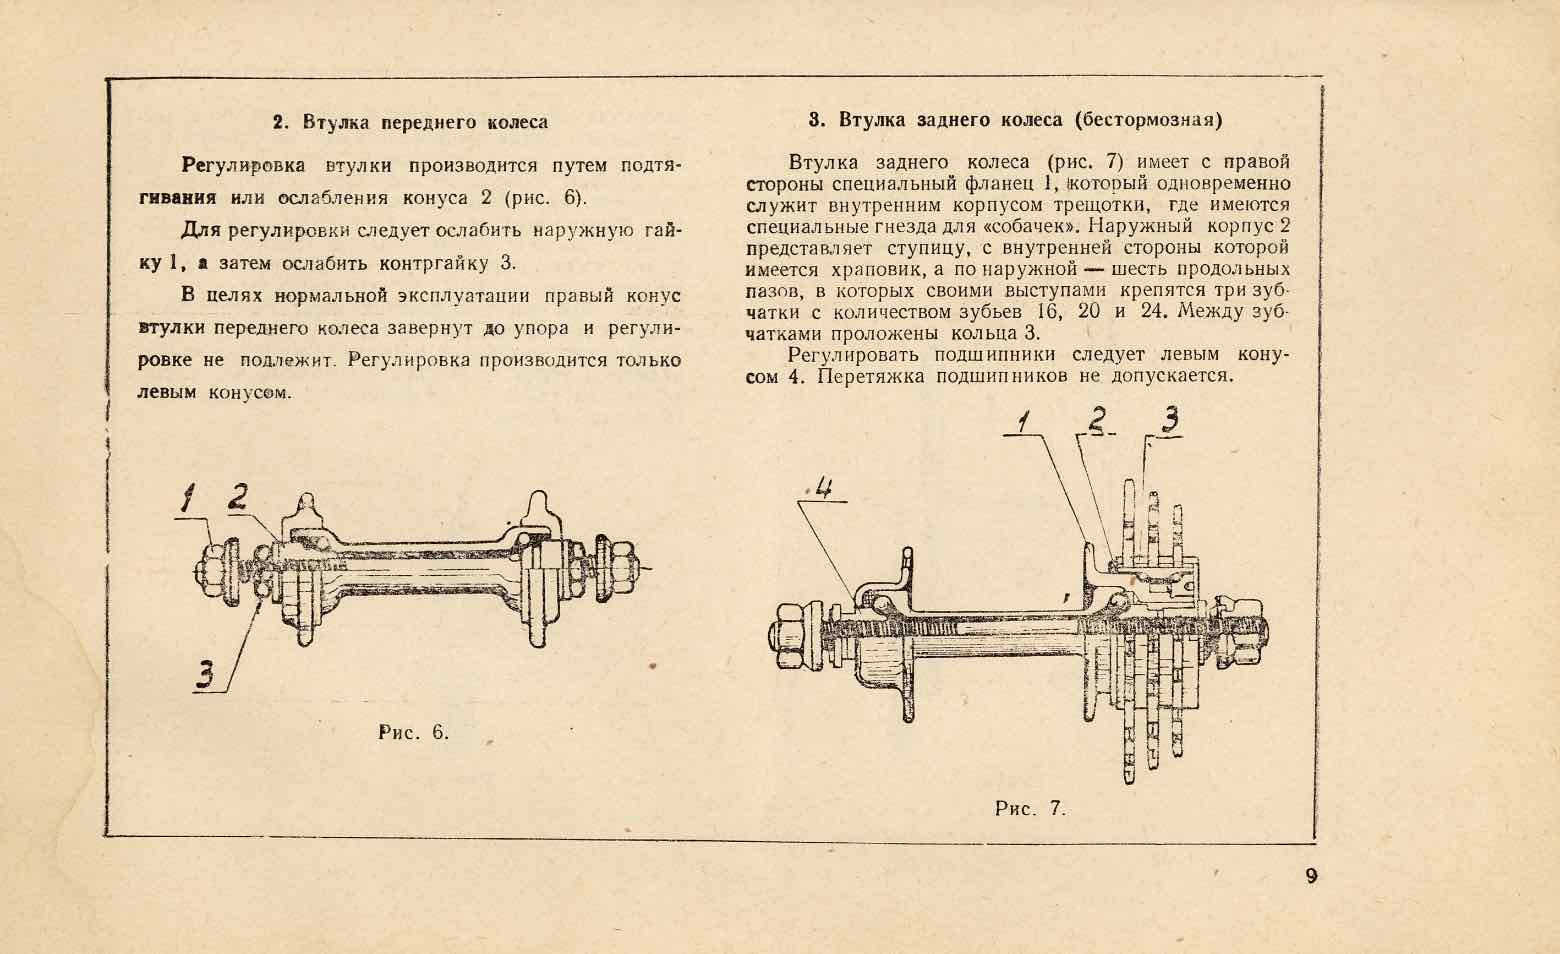 Kharkov - instructions for B33 - page 9 main image